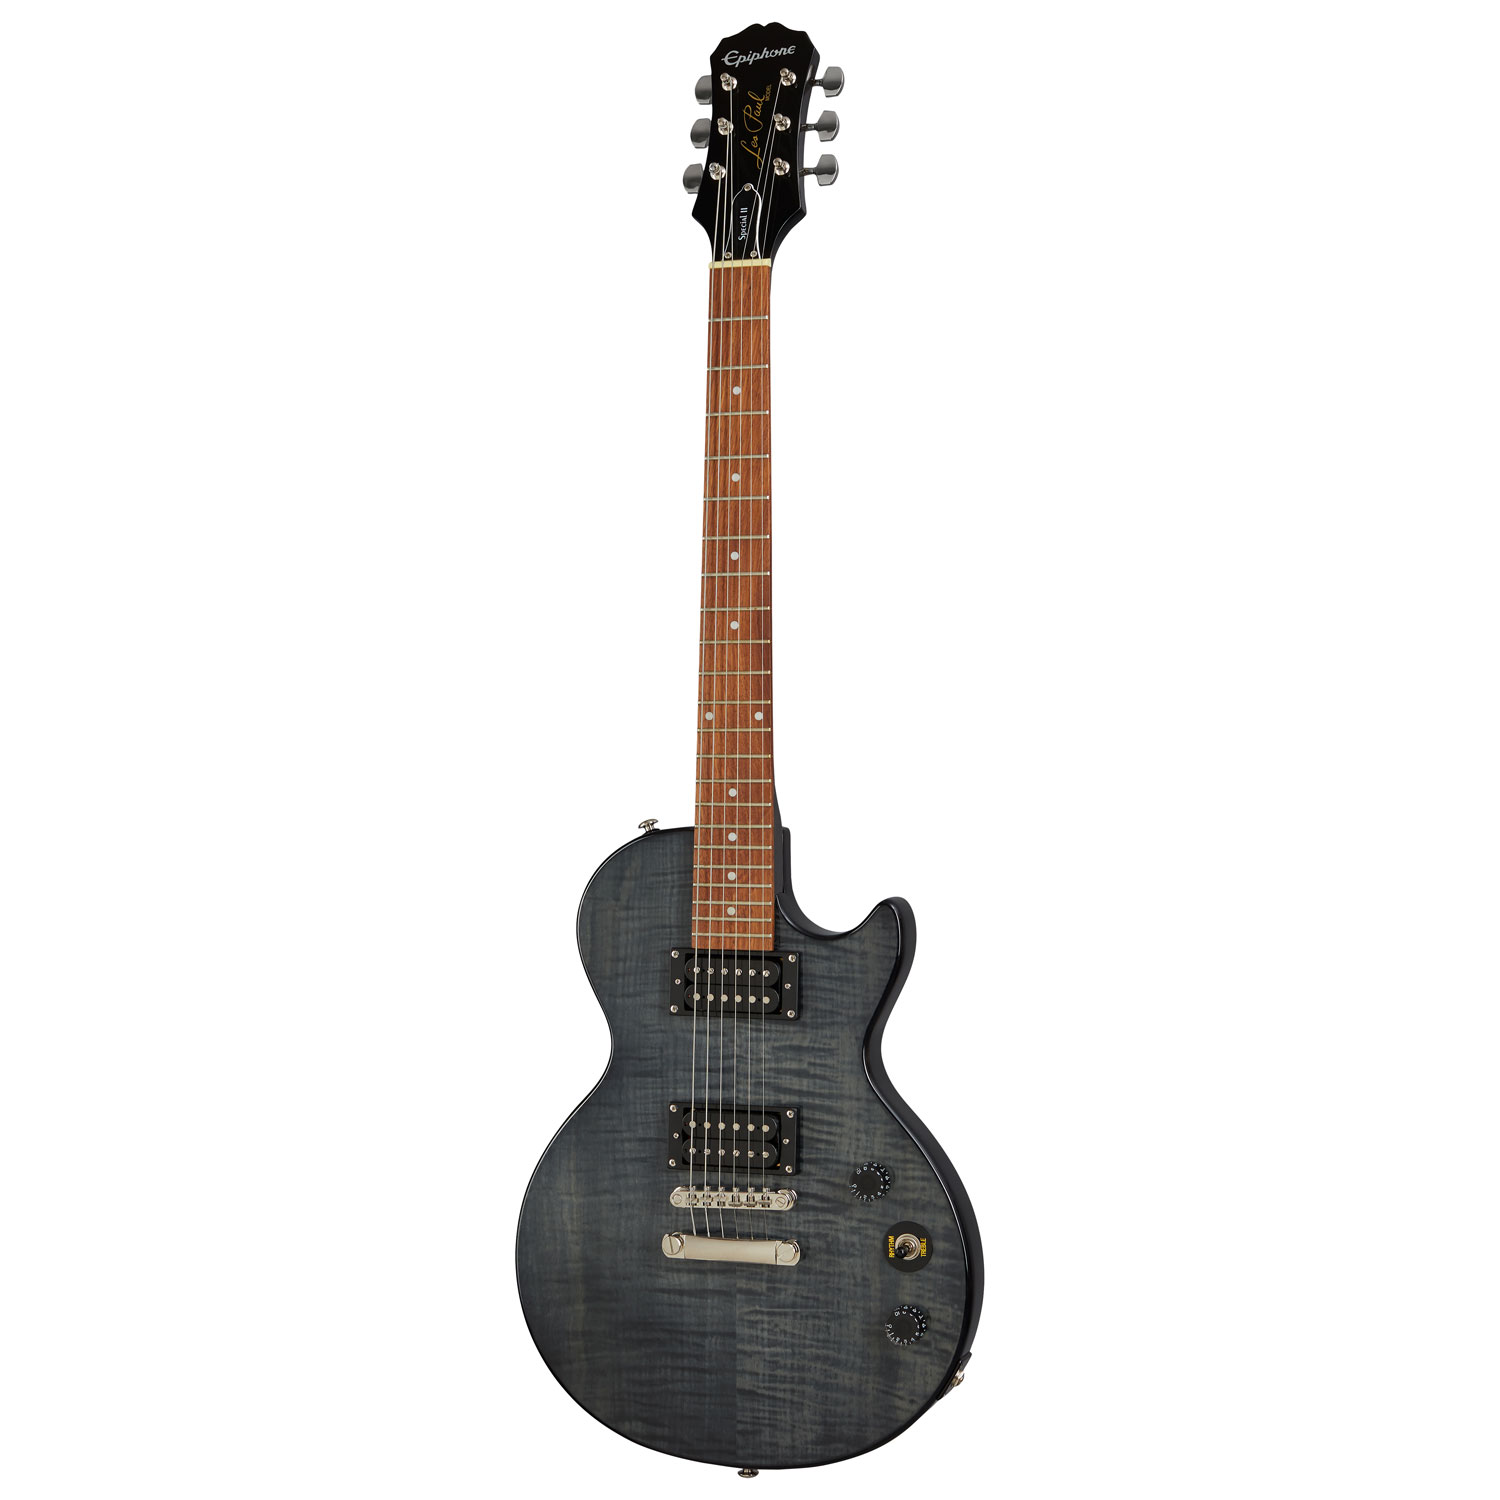 Epiphone Les Paul Special II Plus Top LE Electric Guitar (ENS2TBNH3) - Black - Only at Best Buy